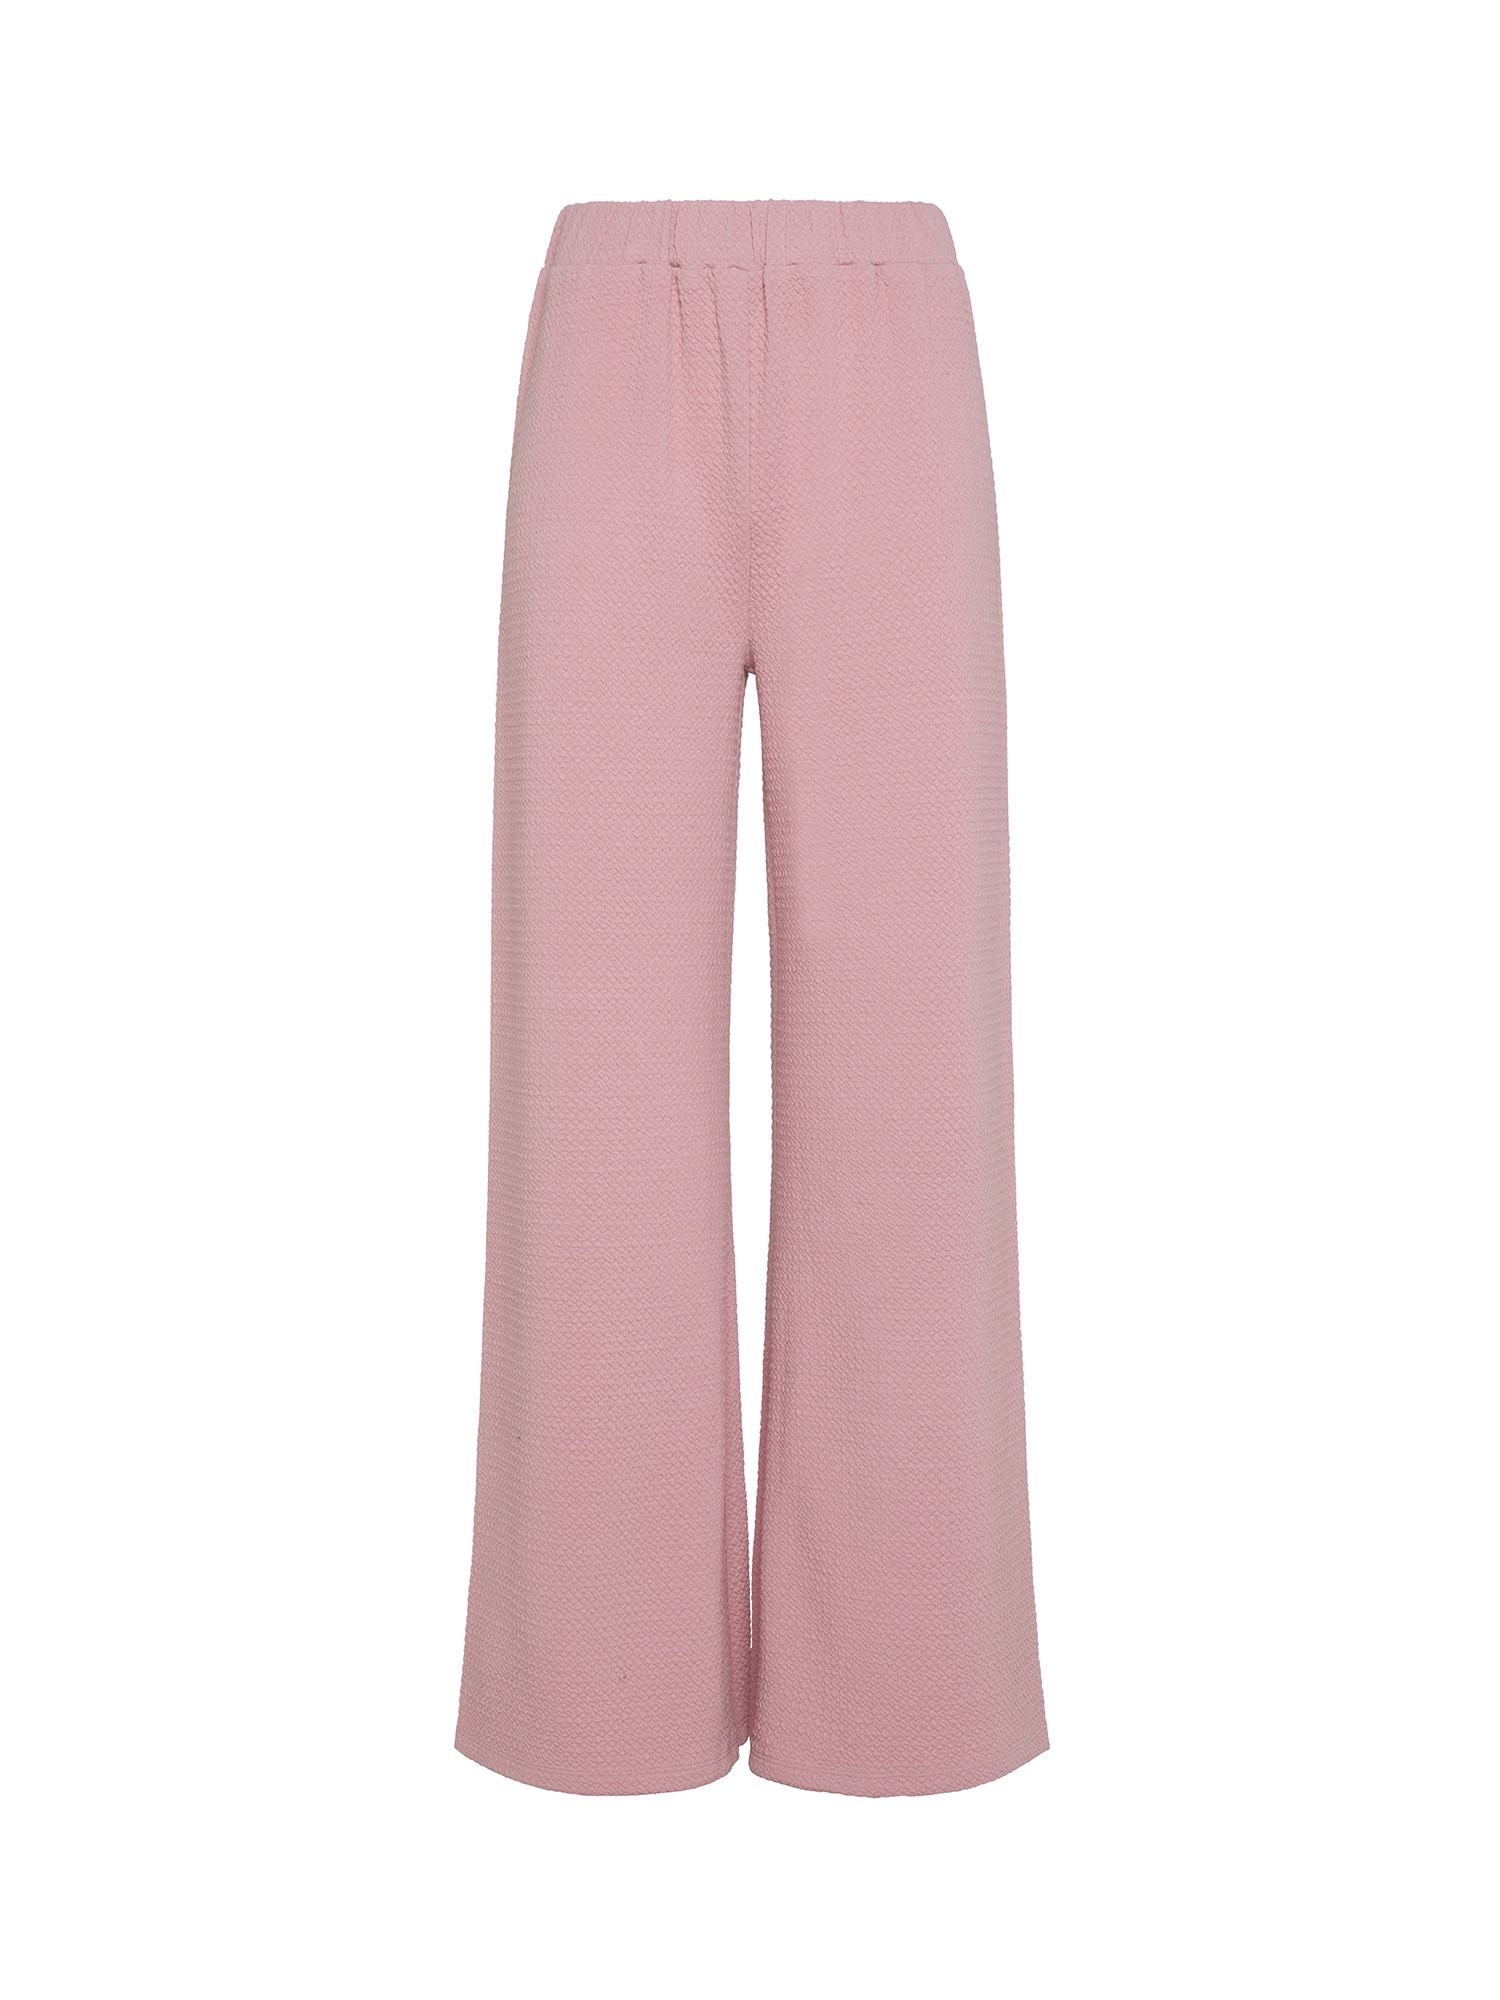 Koan - Pants in soft textured jersey, Pink, large image number 0